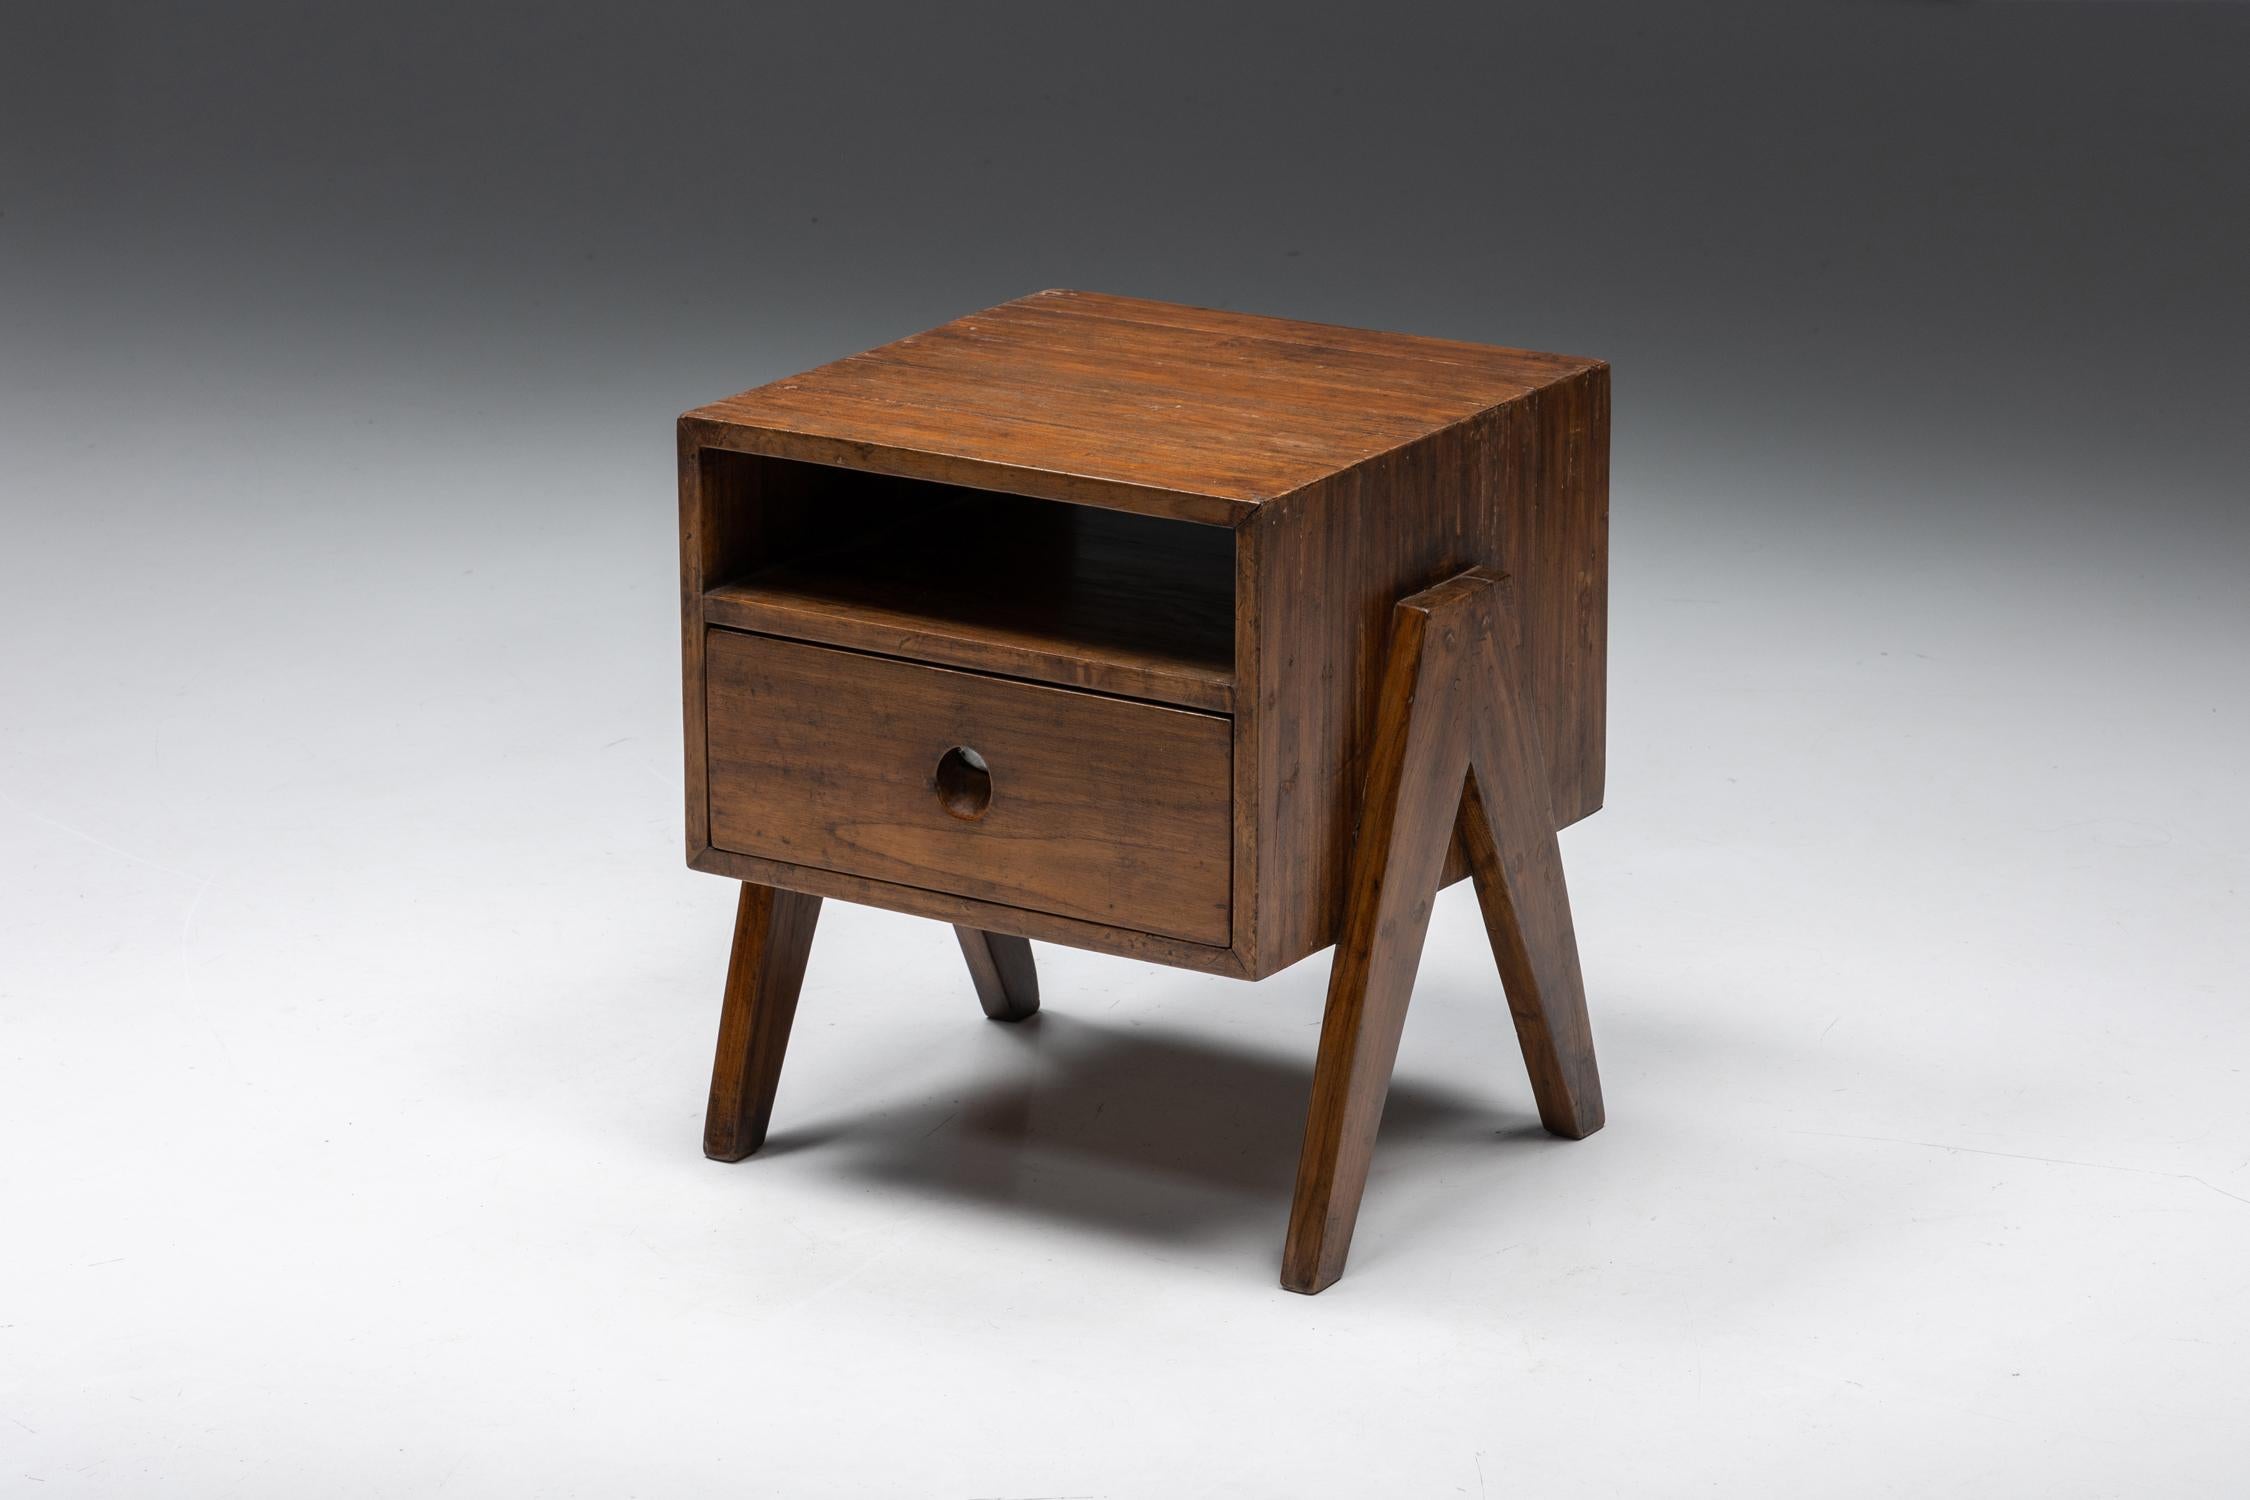 Mid-20th Century Solid Teak Bedside Tables by Pierre Jeanneret, Chandigarh, 1955